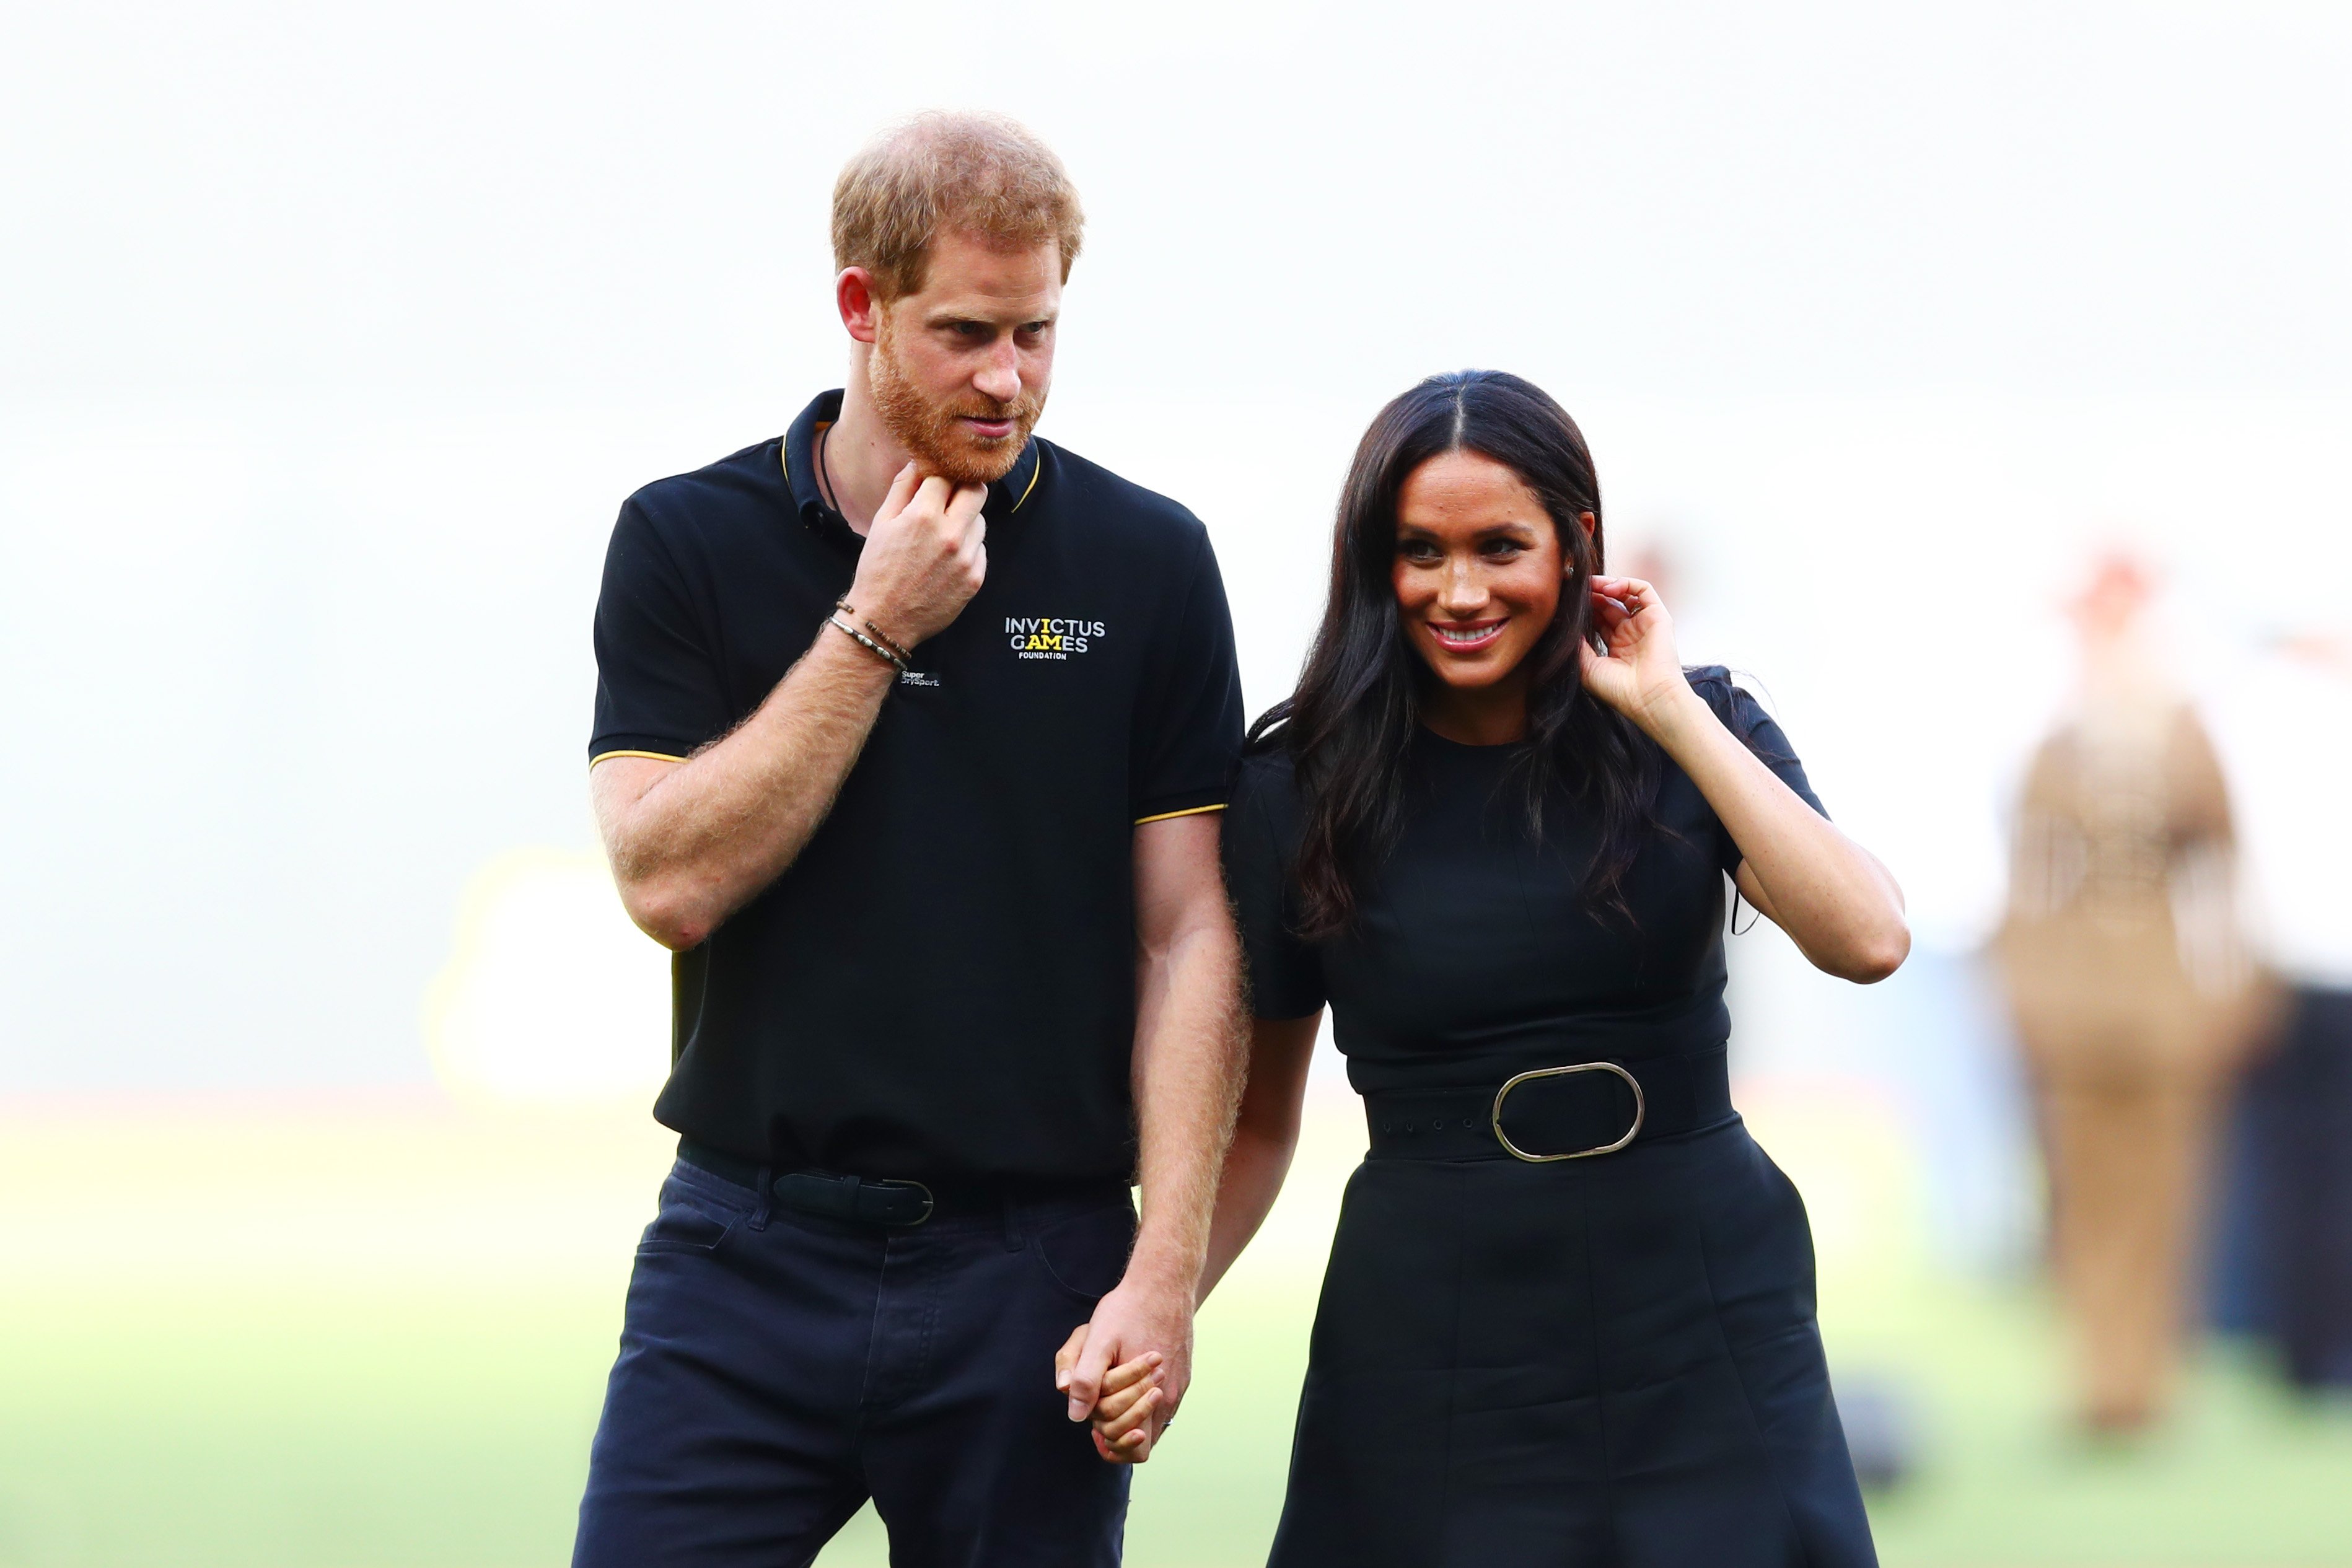 Prince Harry and Meghan Markle during the pre-game ceremonies before the MLB London Series game between Boston Red Sox and New York Yankees at London Stadium on June 29, 2019 in London, England. / Source: Getty Images